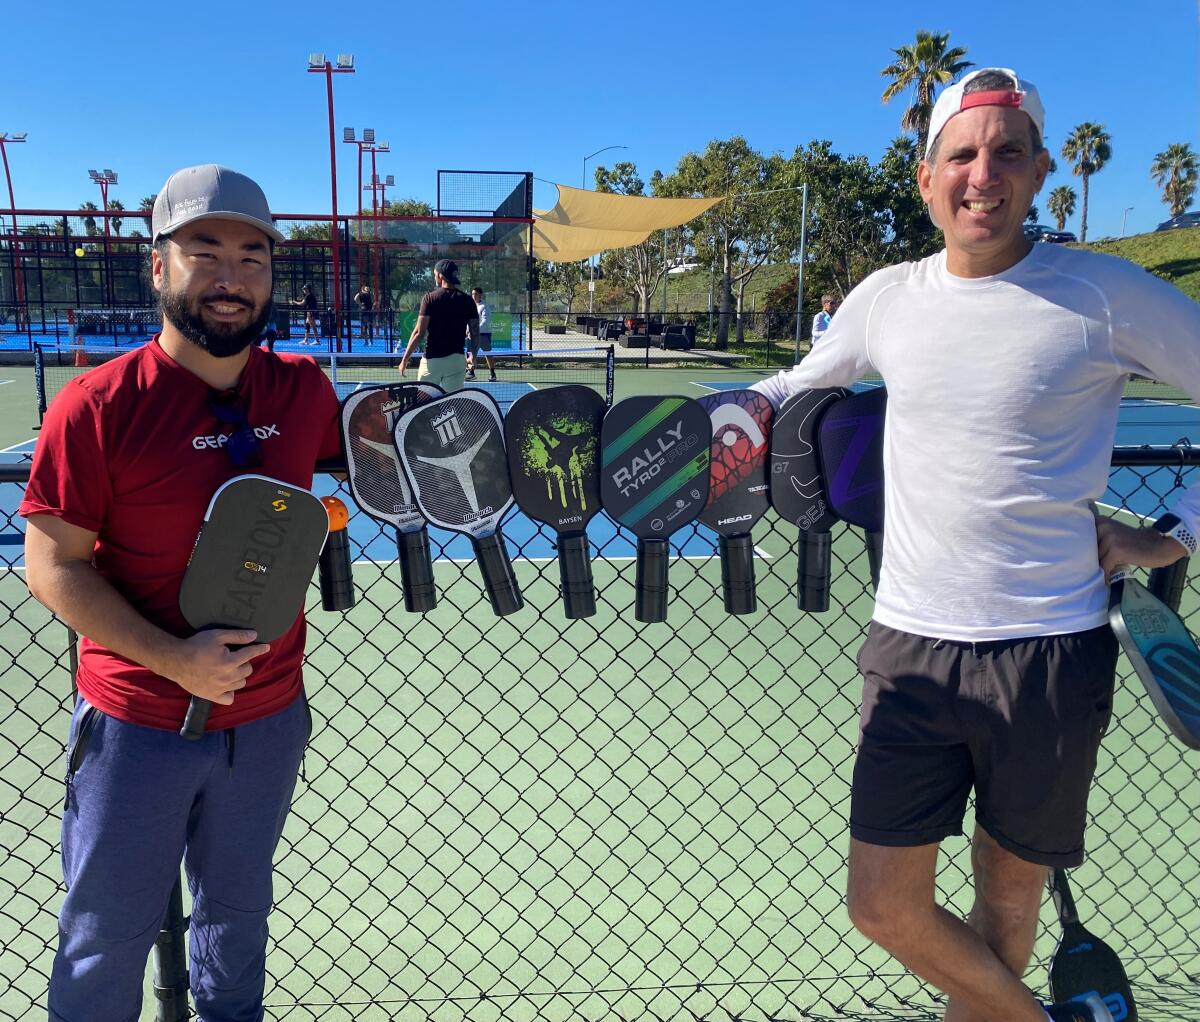 Pickleball instructors and advocates Mike Shinzaki and Stefan Boyland  lean on a fence displaying pickleball paddles